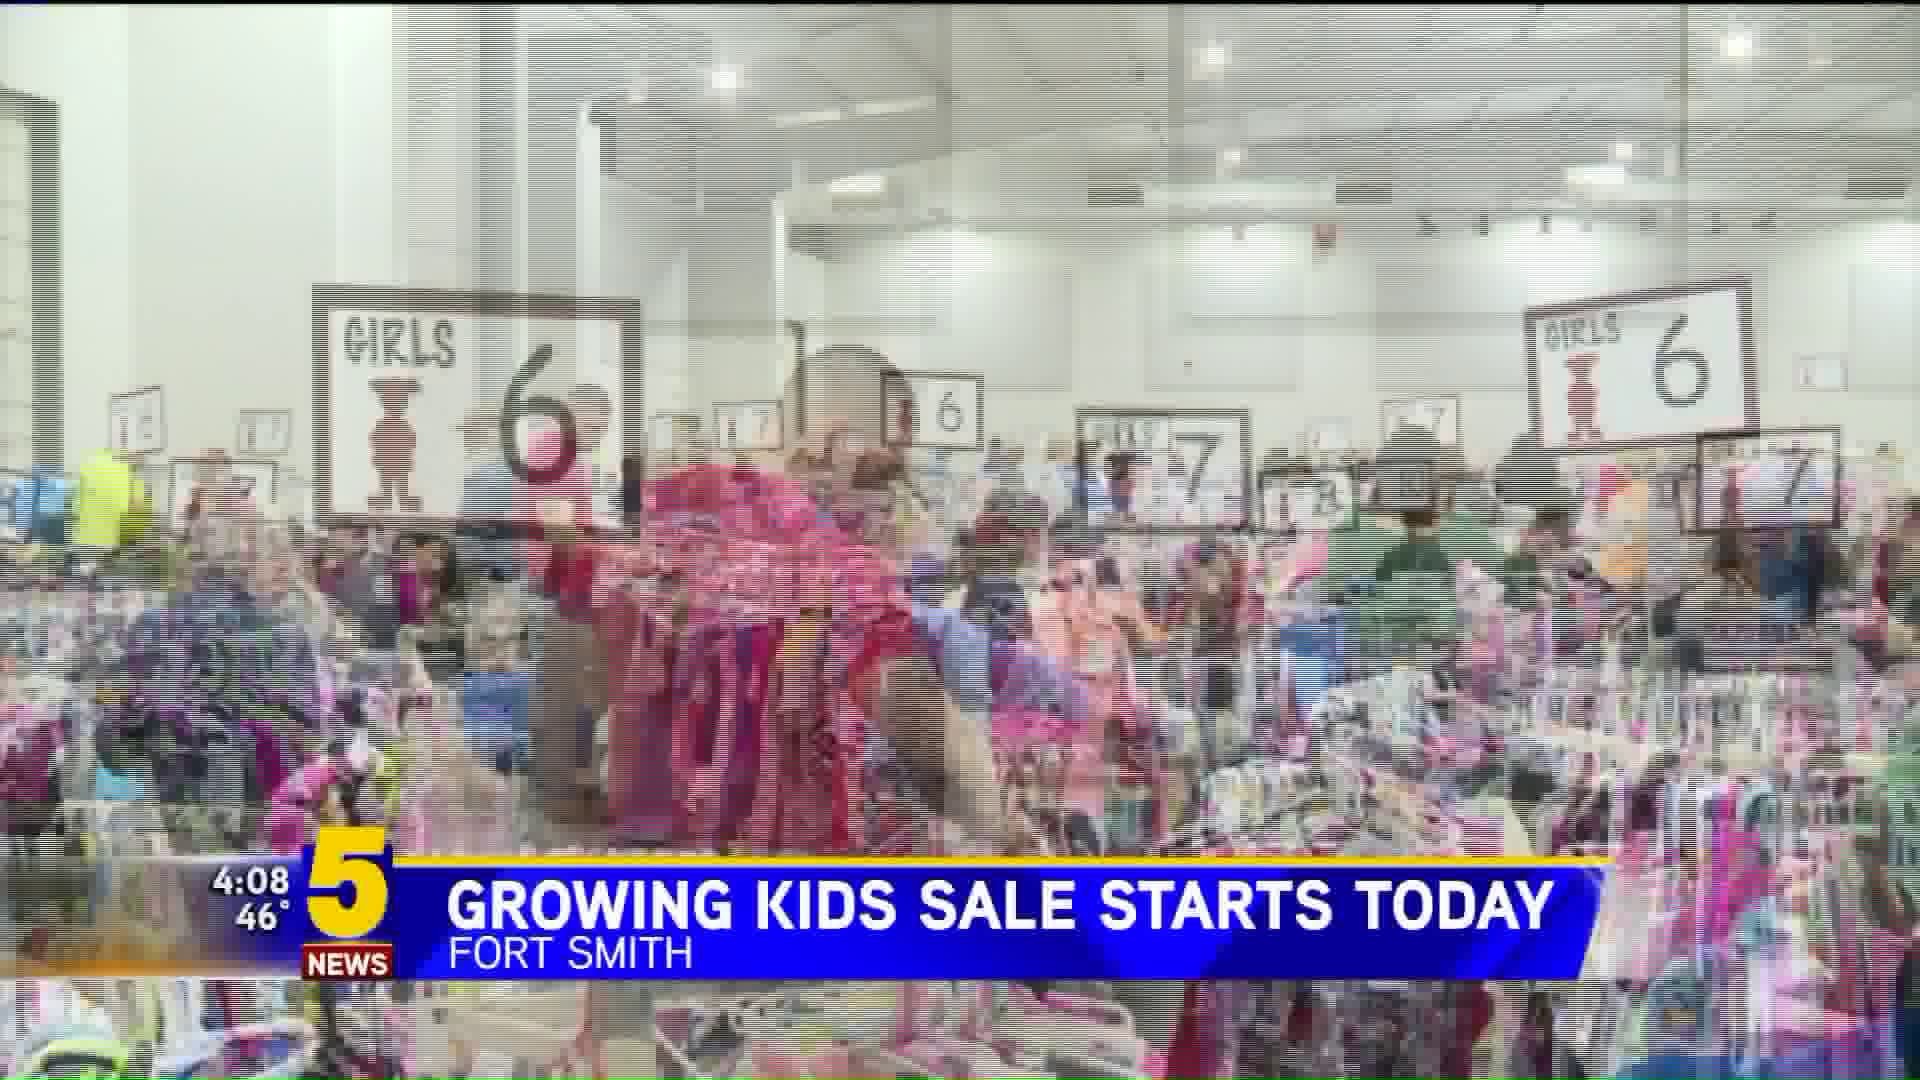 Growing Kids Consignment Sale Starts Today